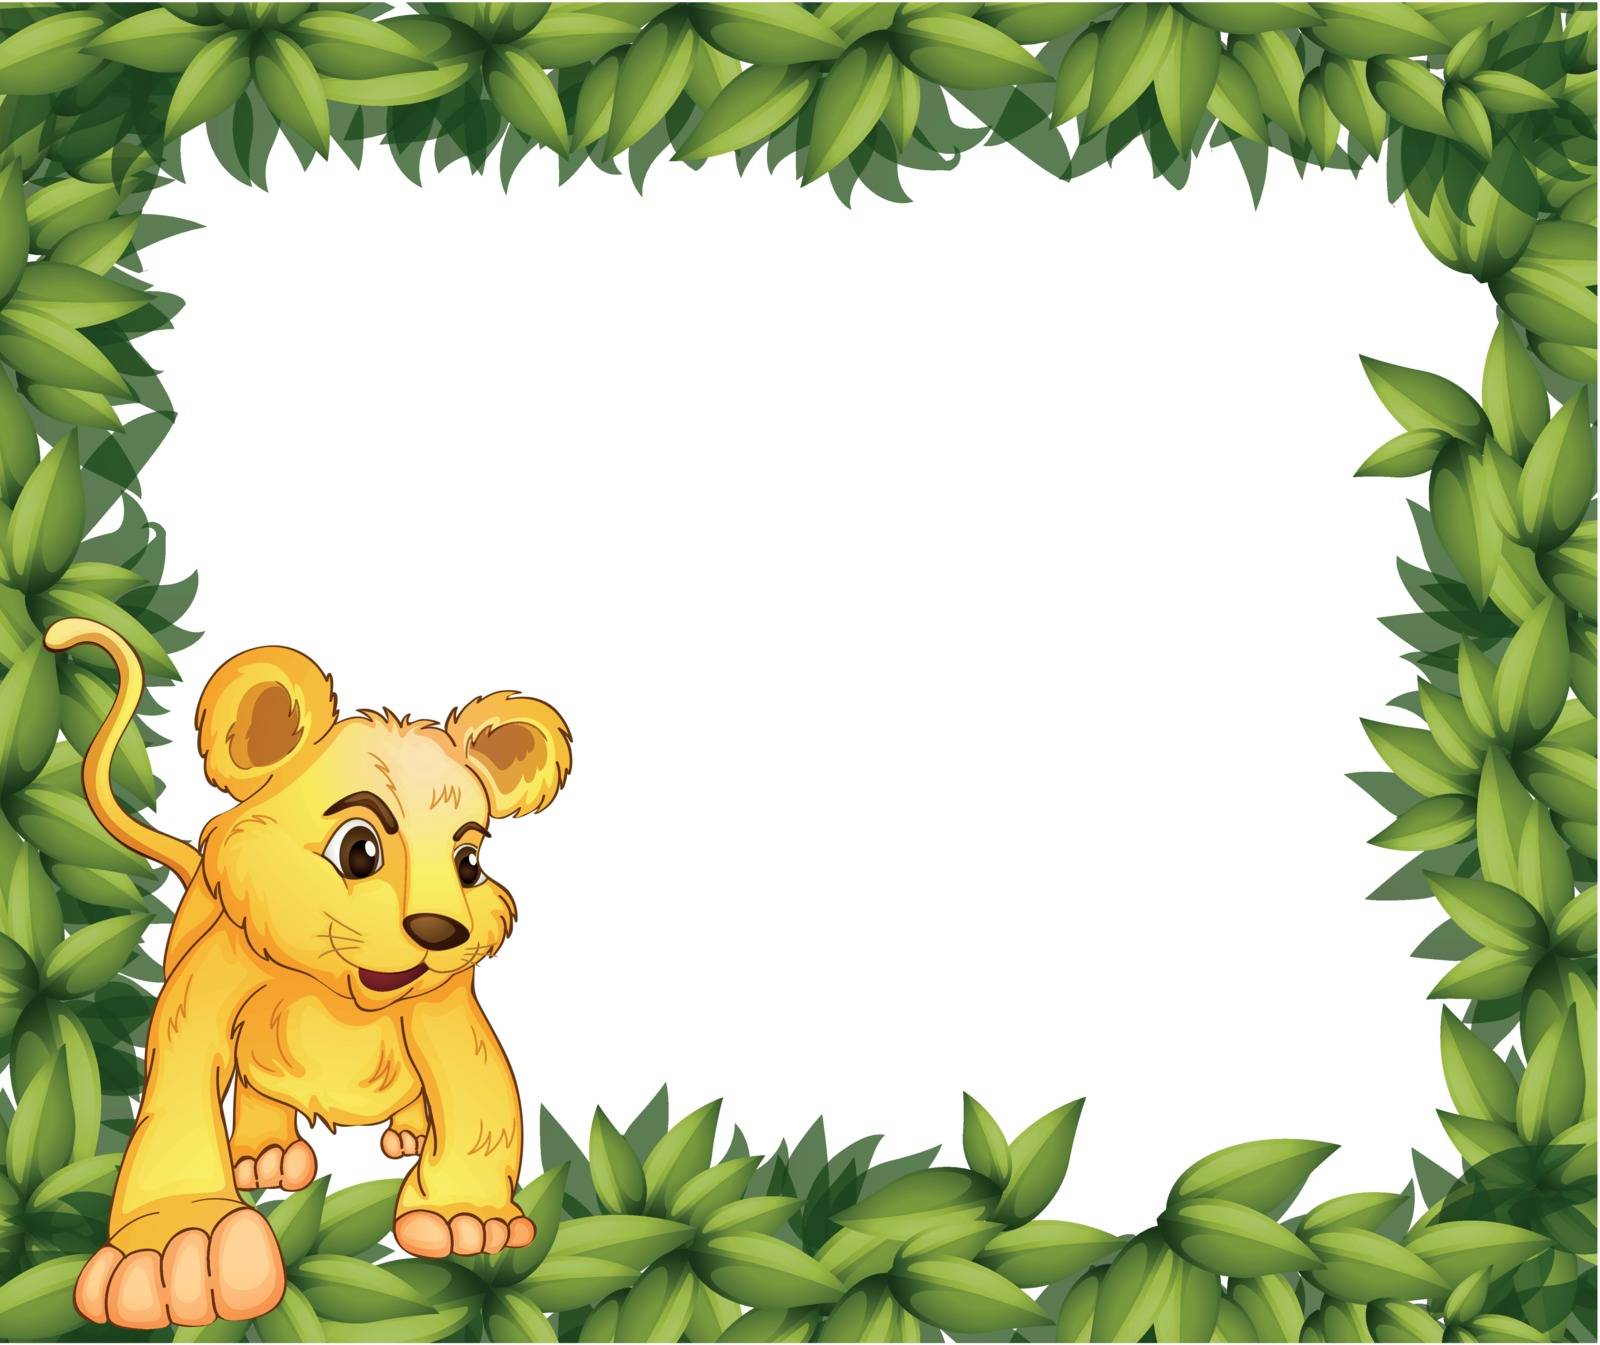 Illustration of a frame with an animal